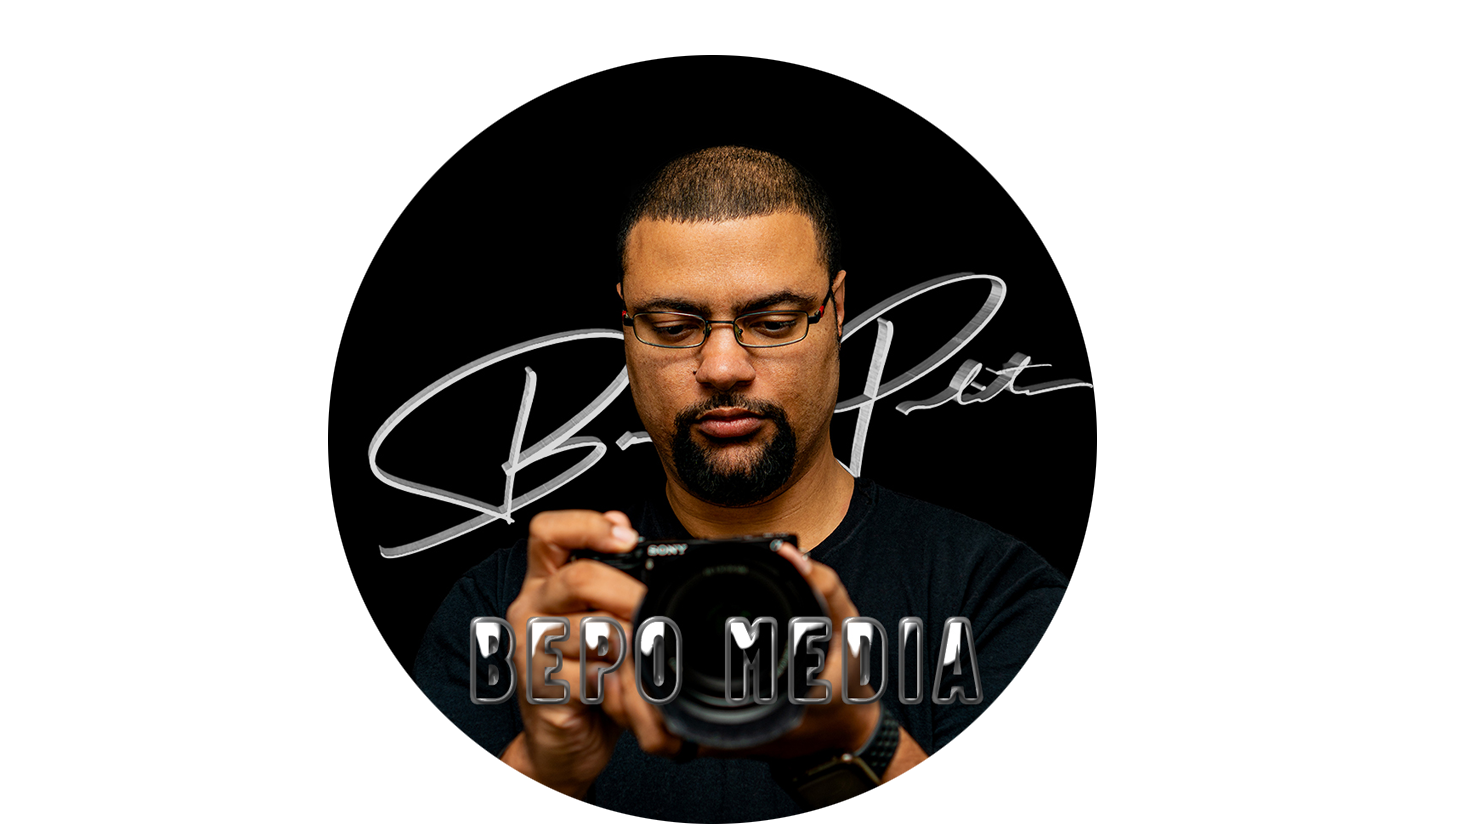 BEPO Media - Capturing Memories One Day At A Time